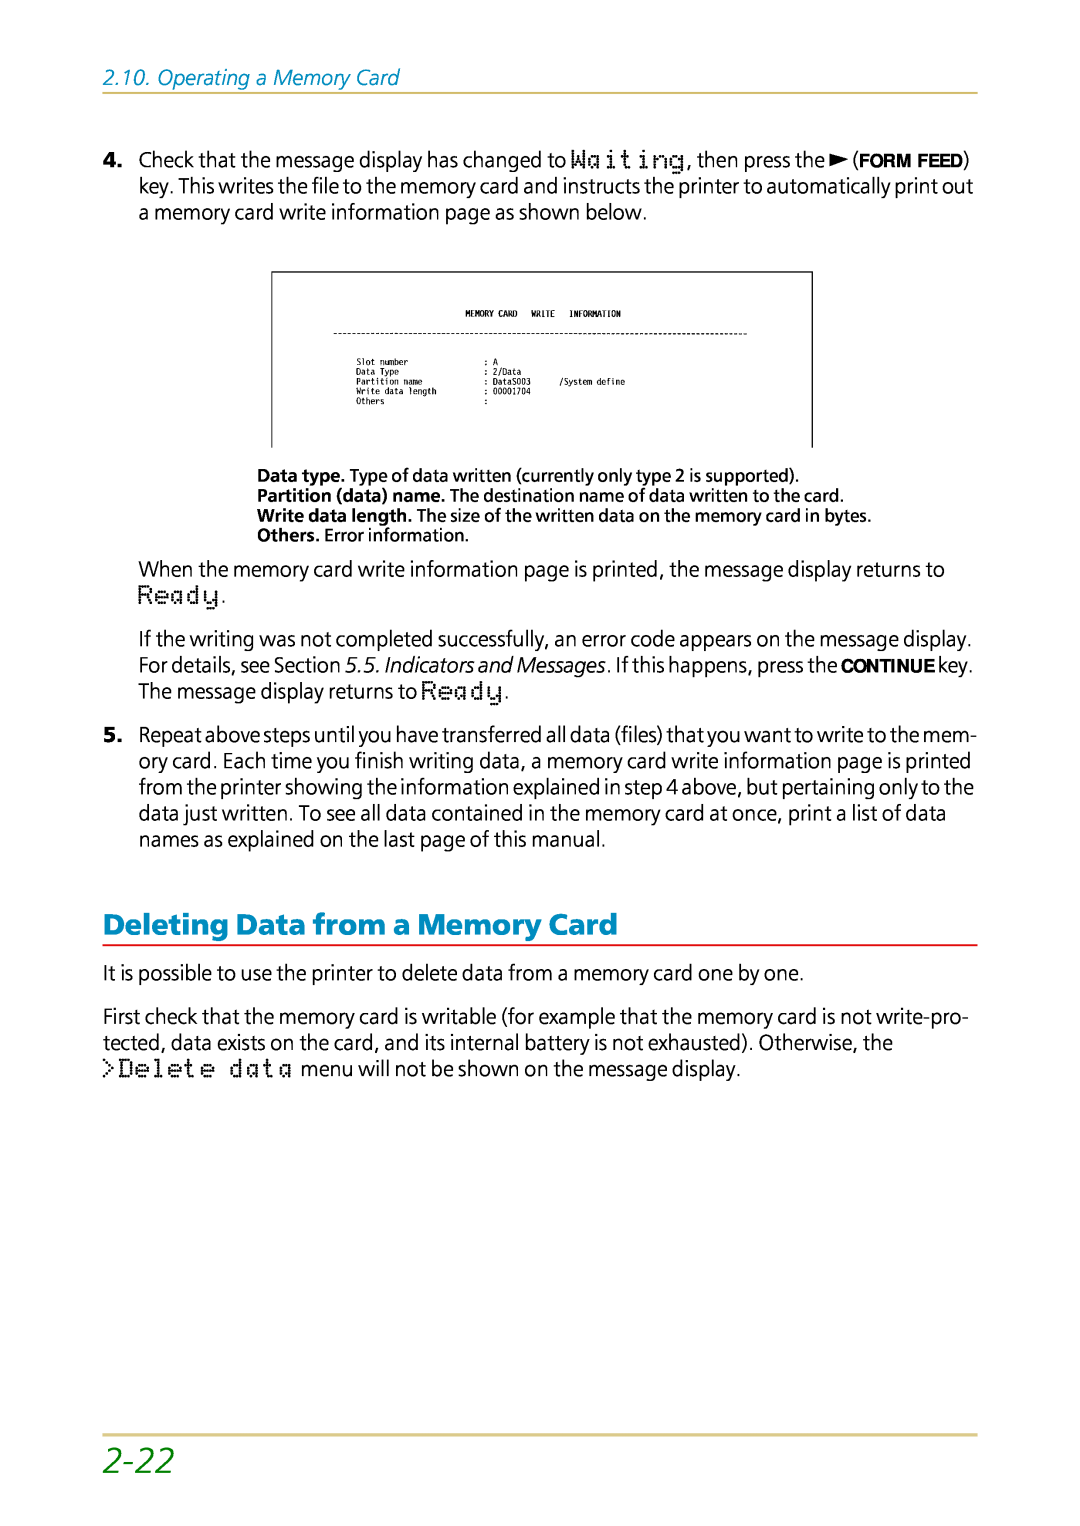 Kyocera FS-1700 user manual 2-22, Deleting Data from a Memory Card, Operating a Memory Card 